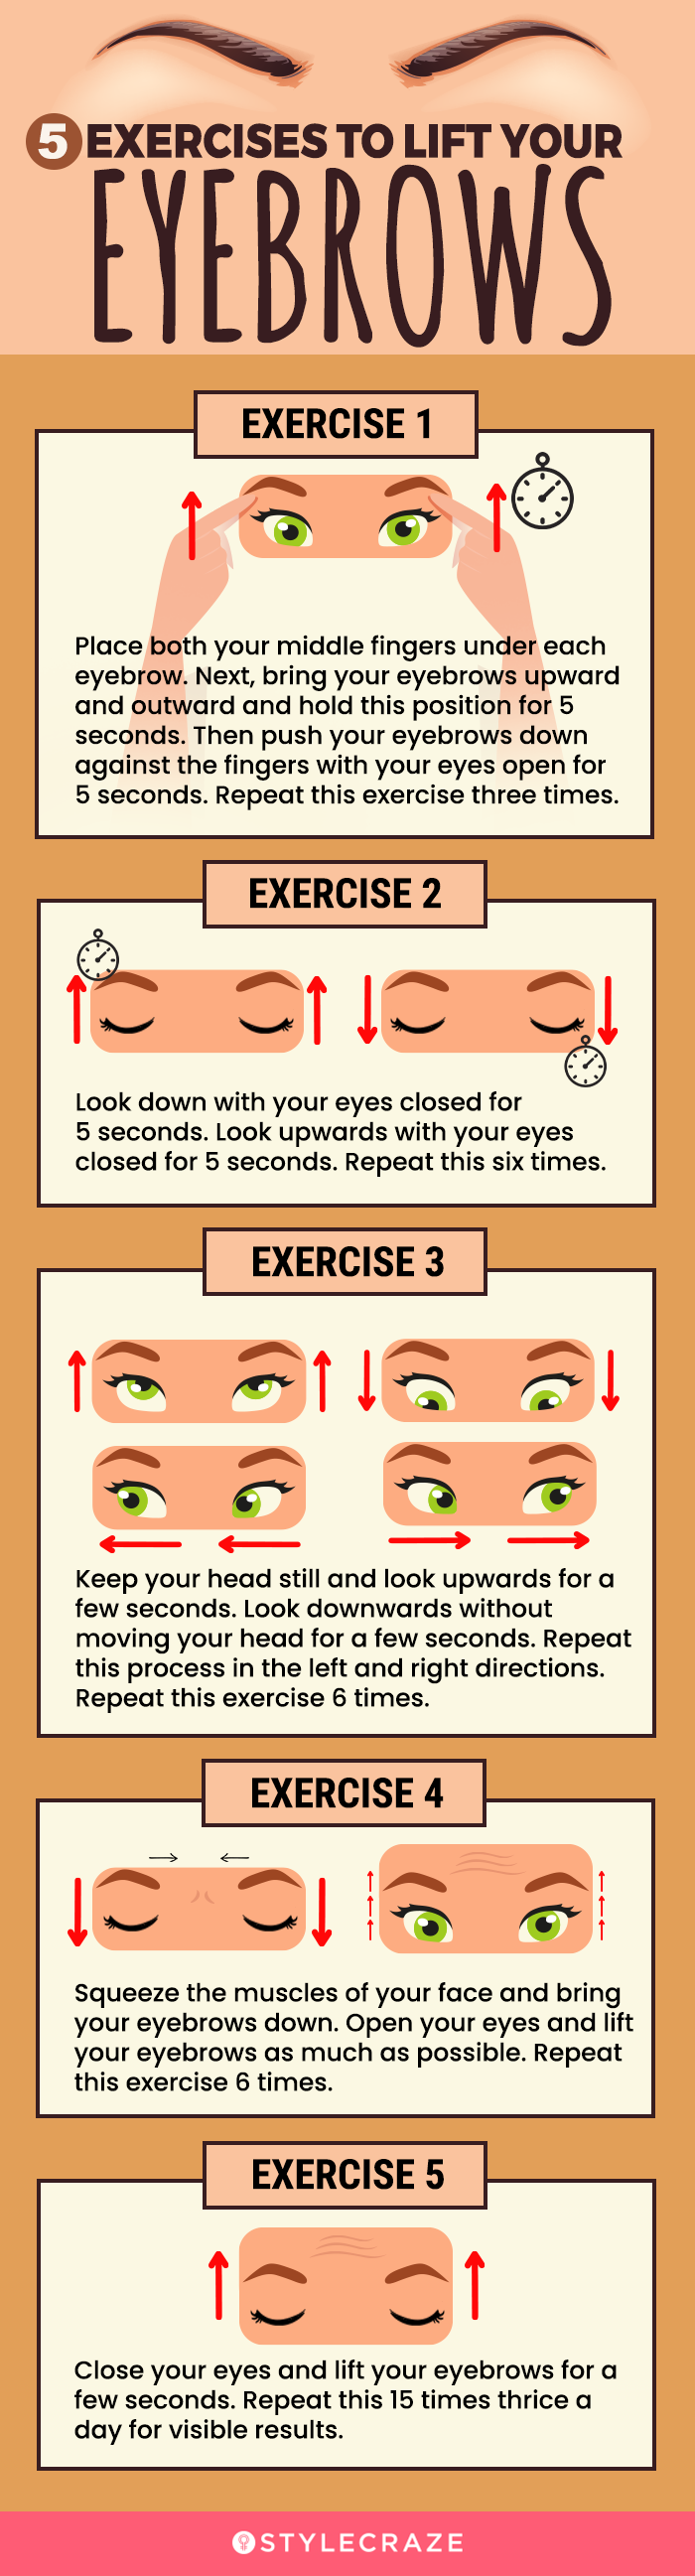 5 exercises to lift your eyebrows (infographic)